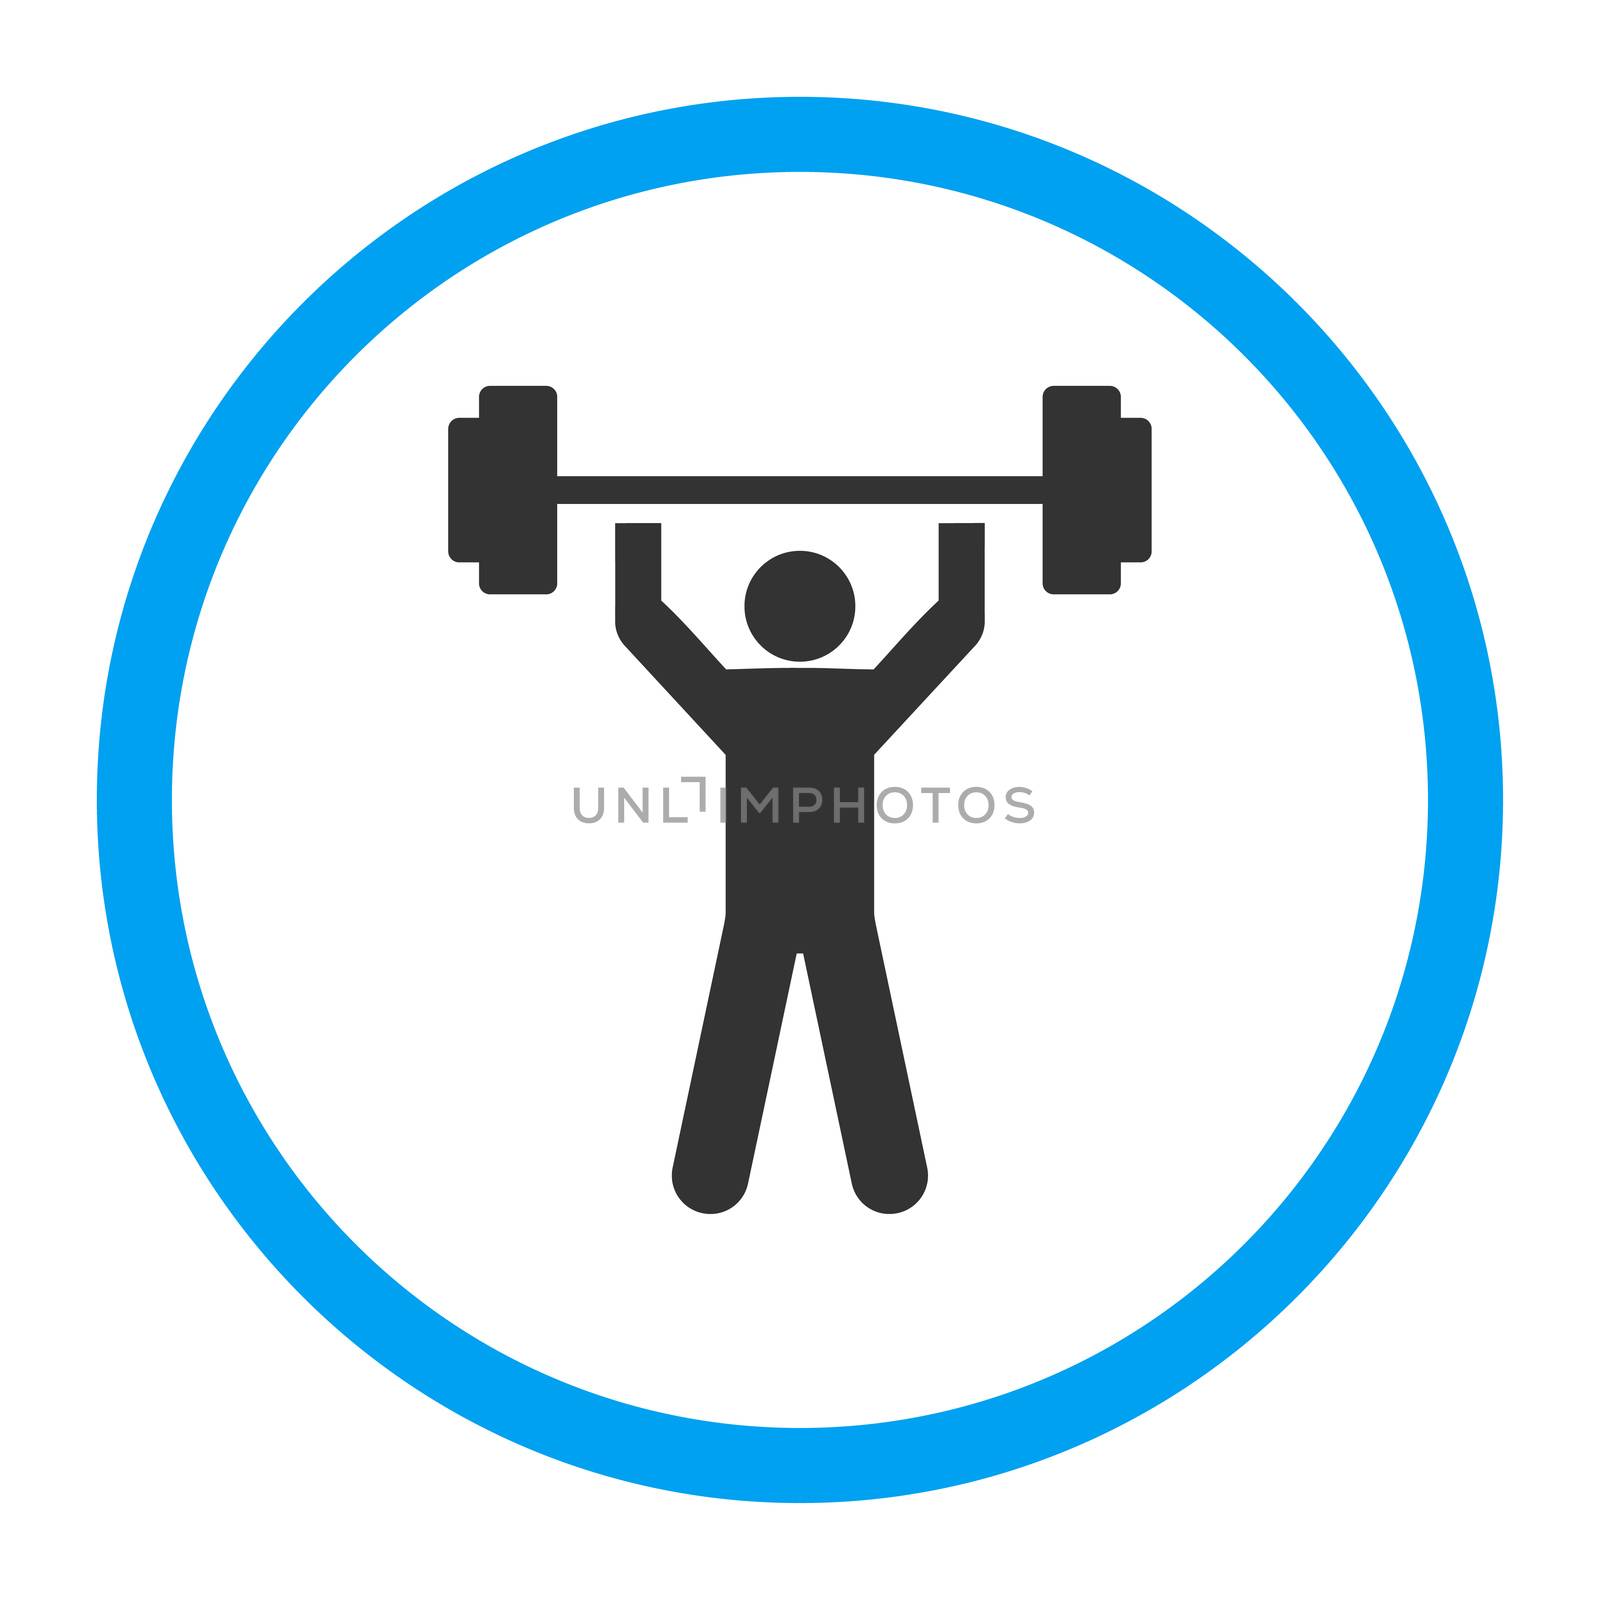 Power lifting icon. This rounded flat symbol is drawn with blue and gray colors on a white background.